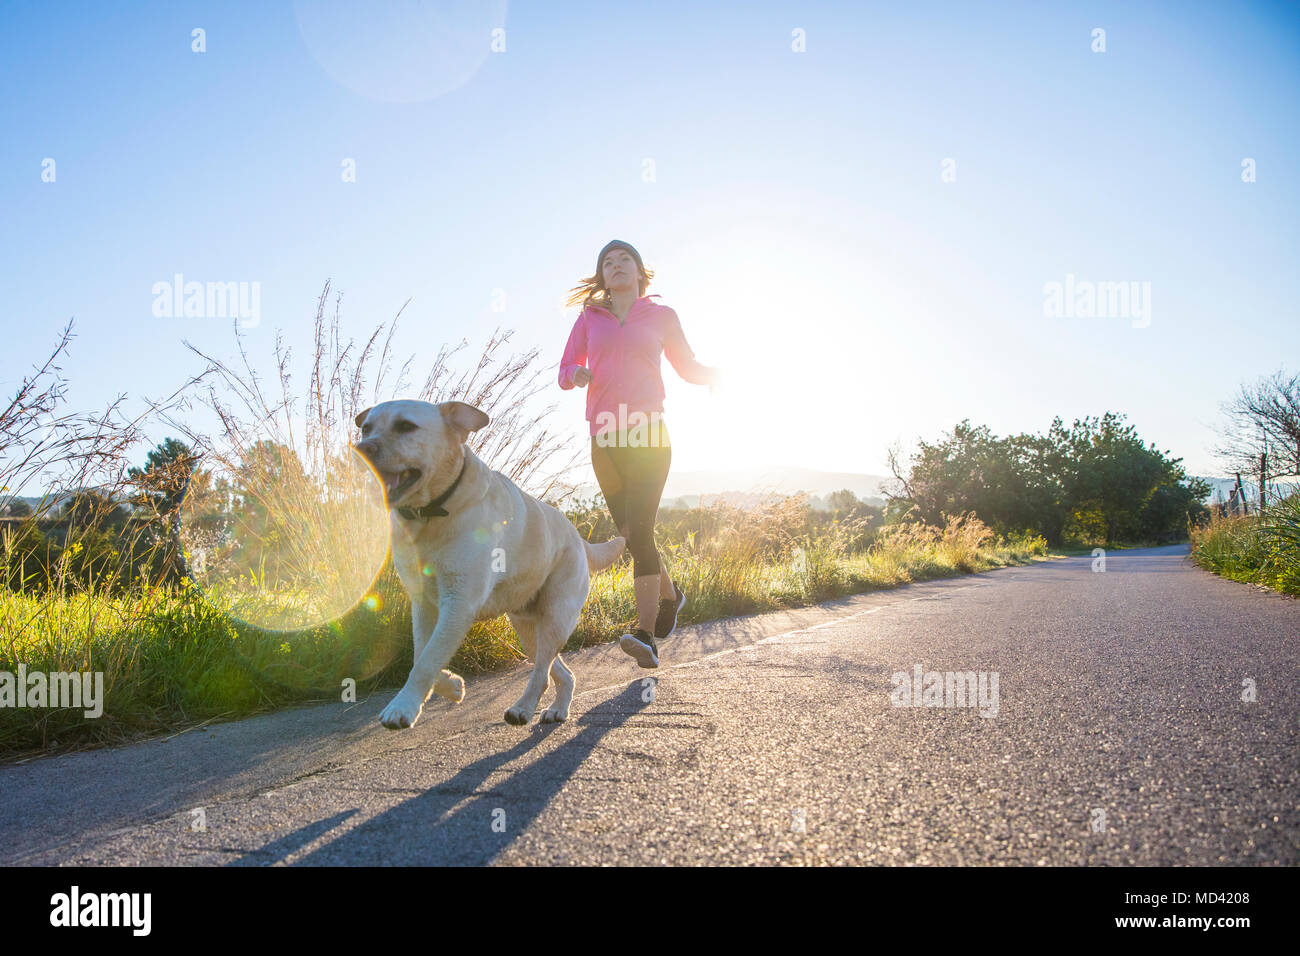 Young woman running along rural road with pet dog, low angle view Stock Photo